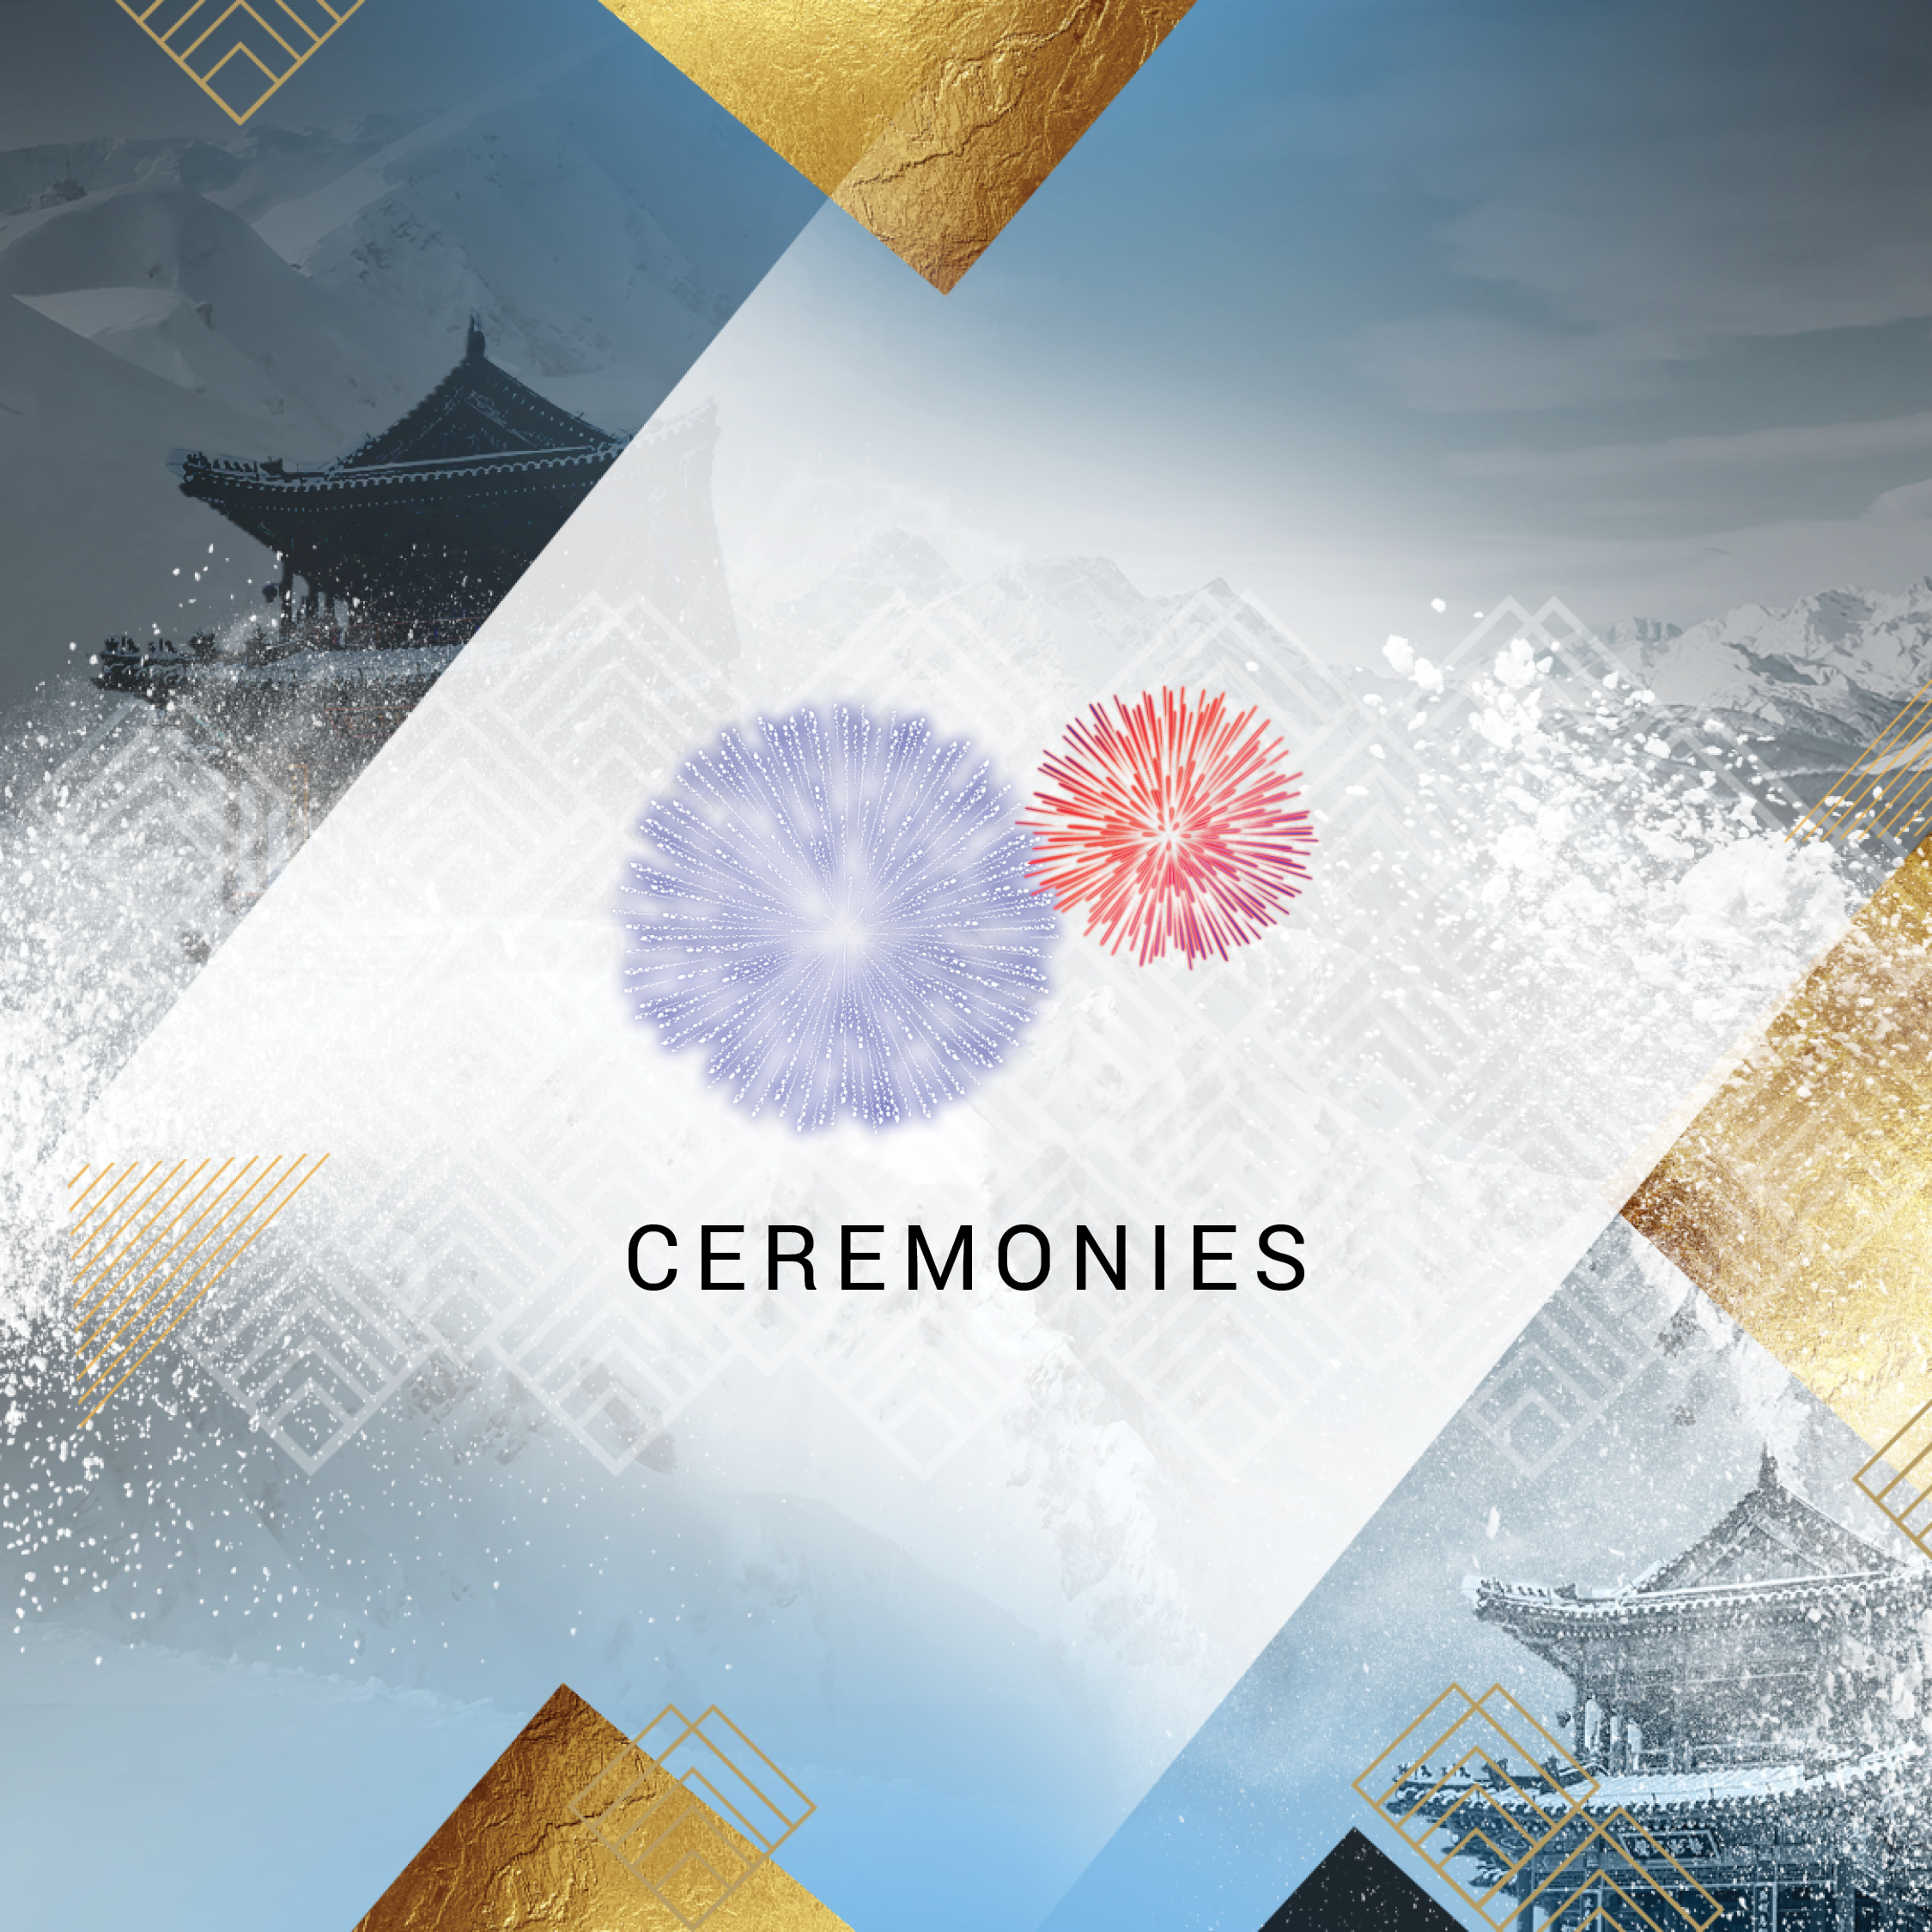 Opening and closing Ceremonies Live stream and video on demand